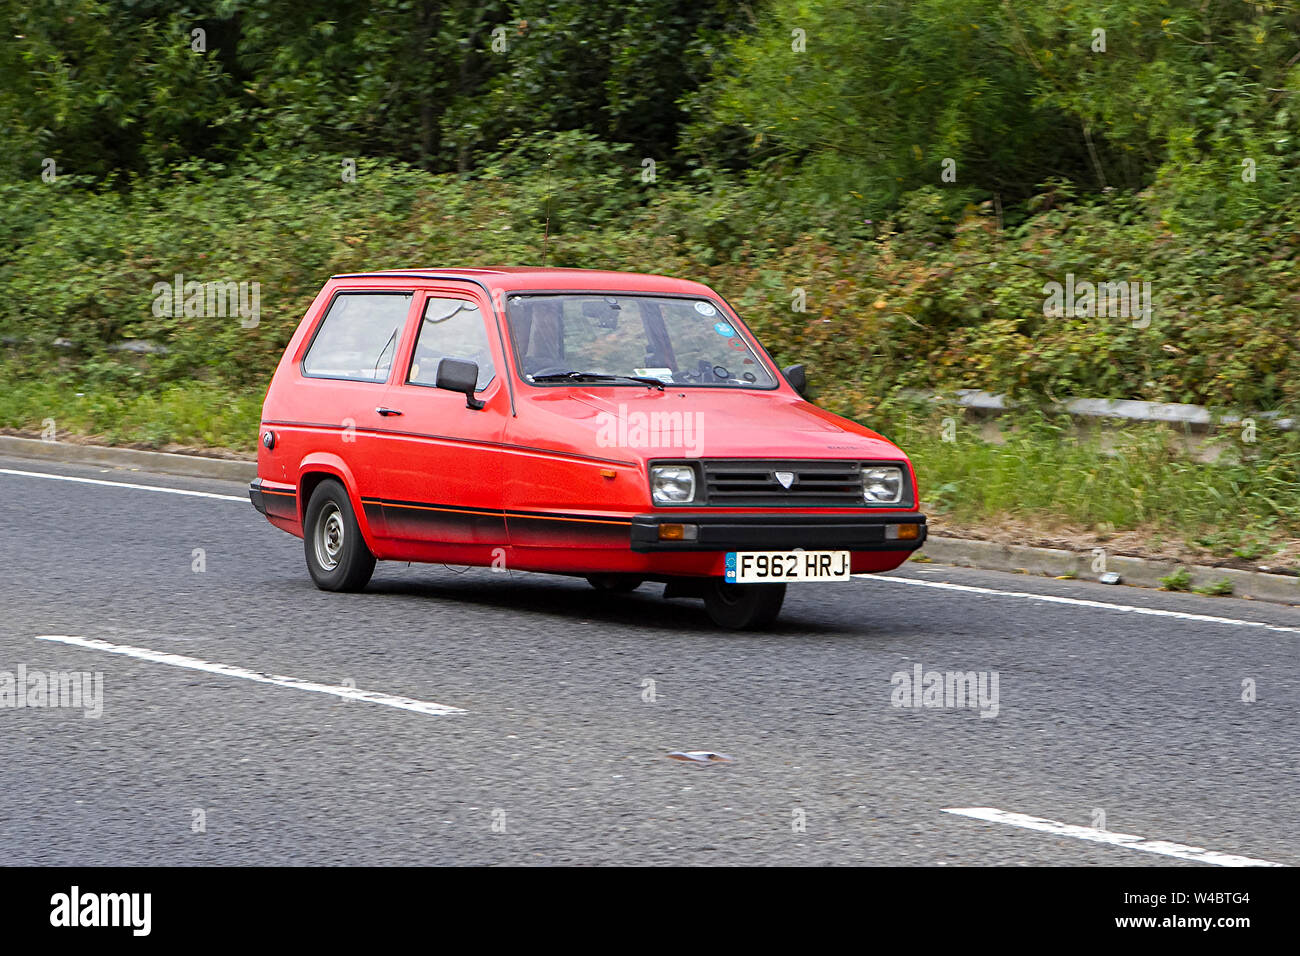 1989 80s eighties red Reliant Rialto VAN; Fleetwood Festival of Transport – Tram Sunday 2019 vintage vehicles and cars attend the classic car show Stock Photo